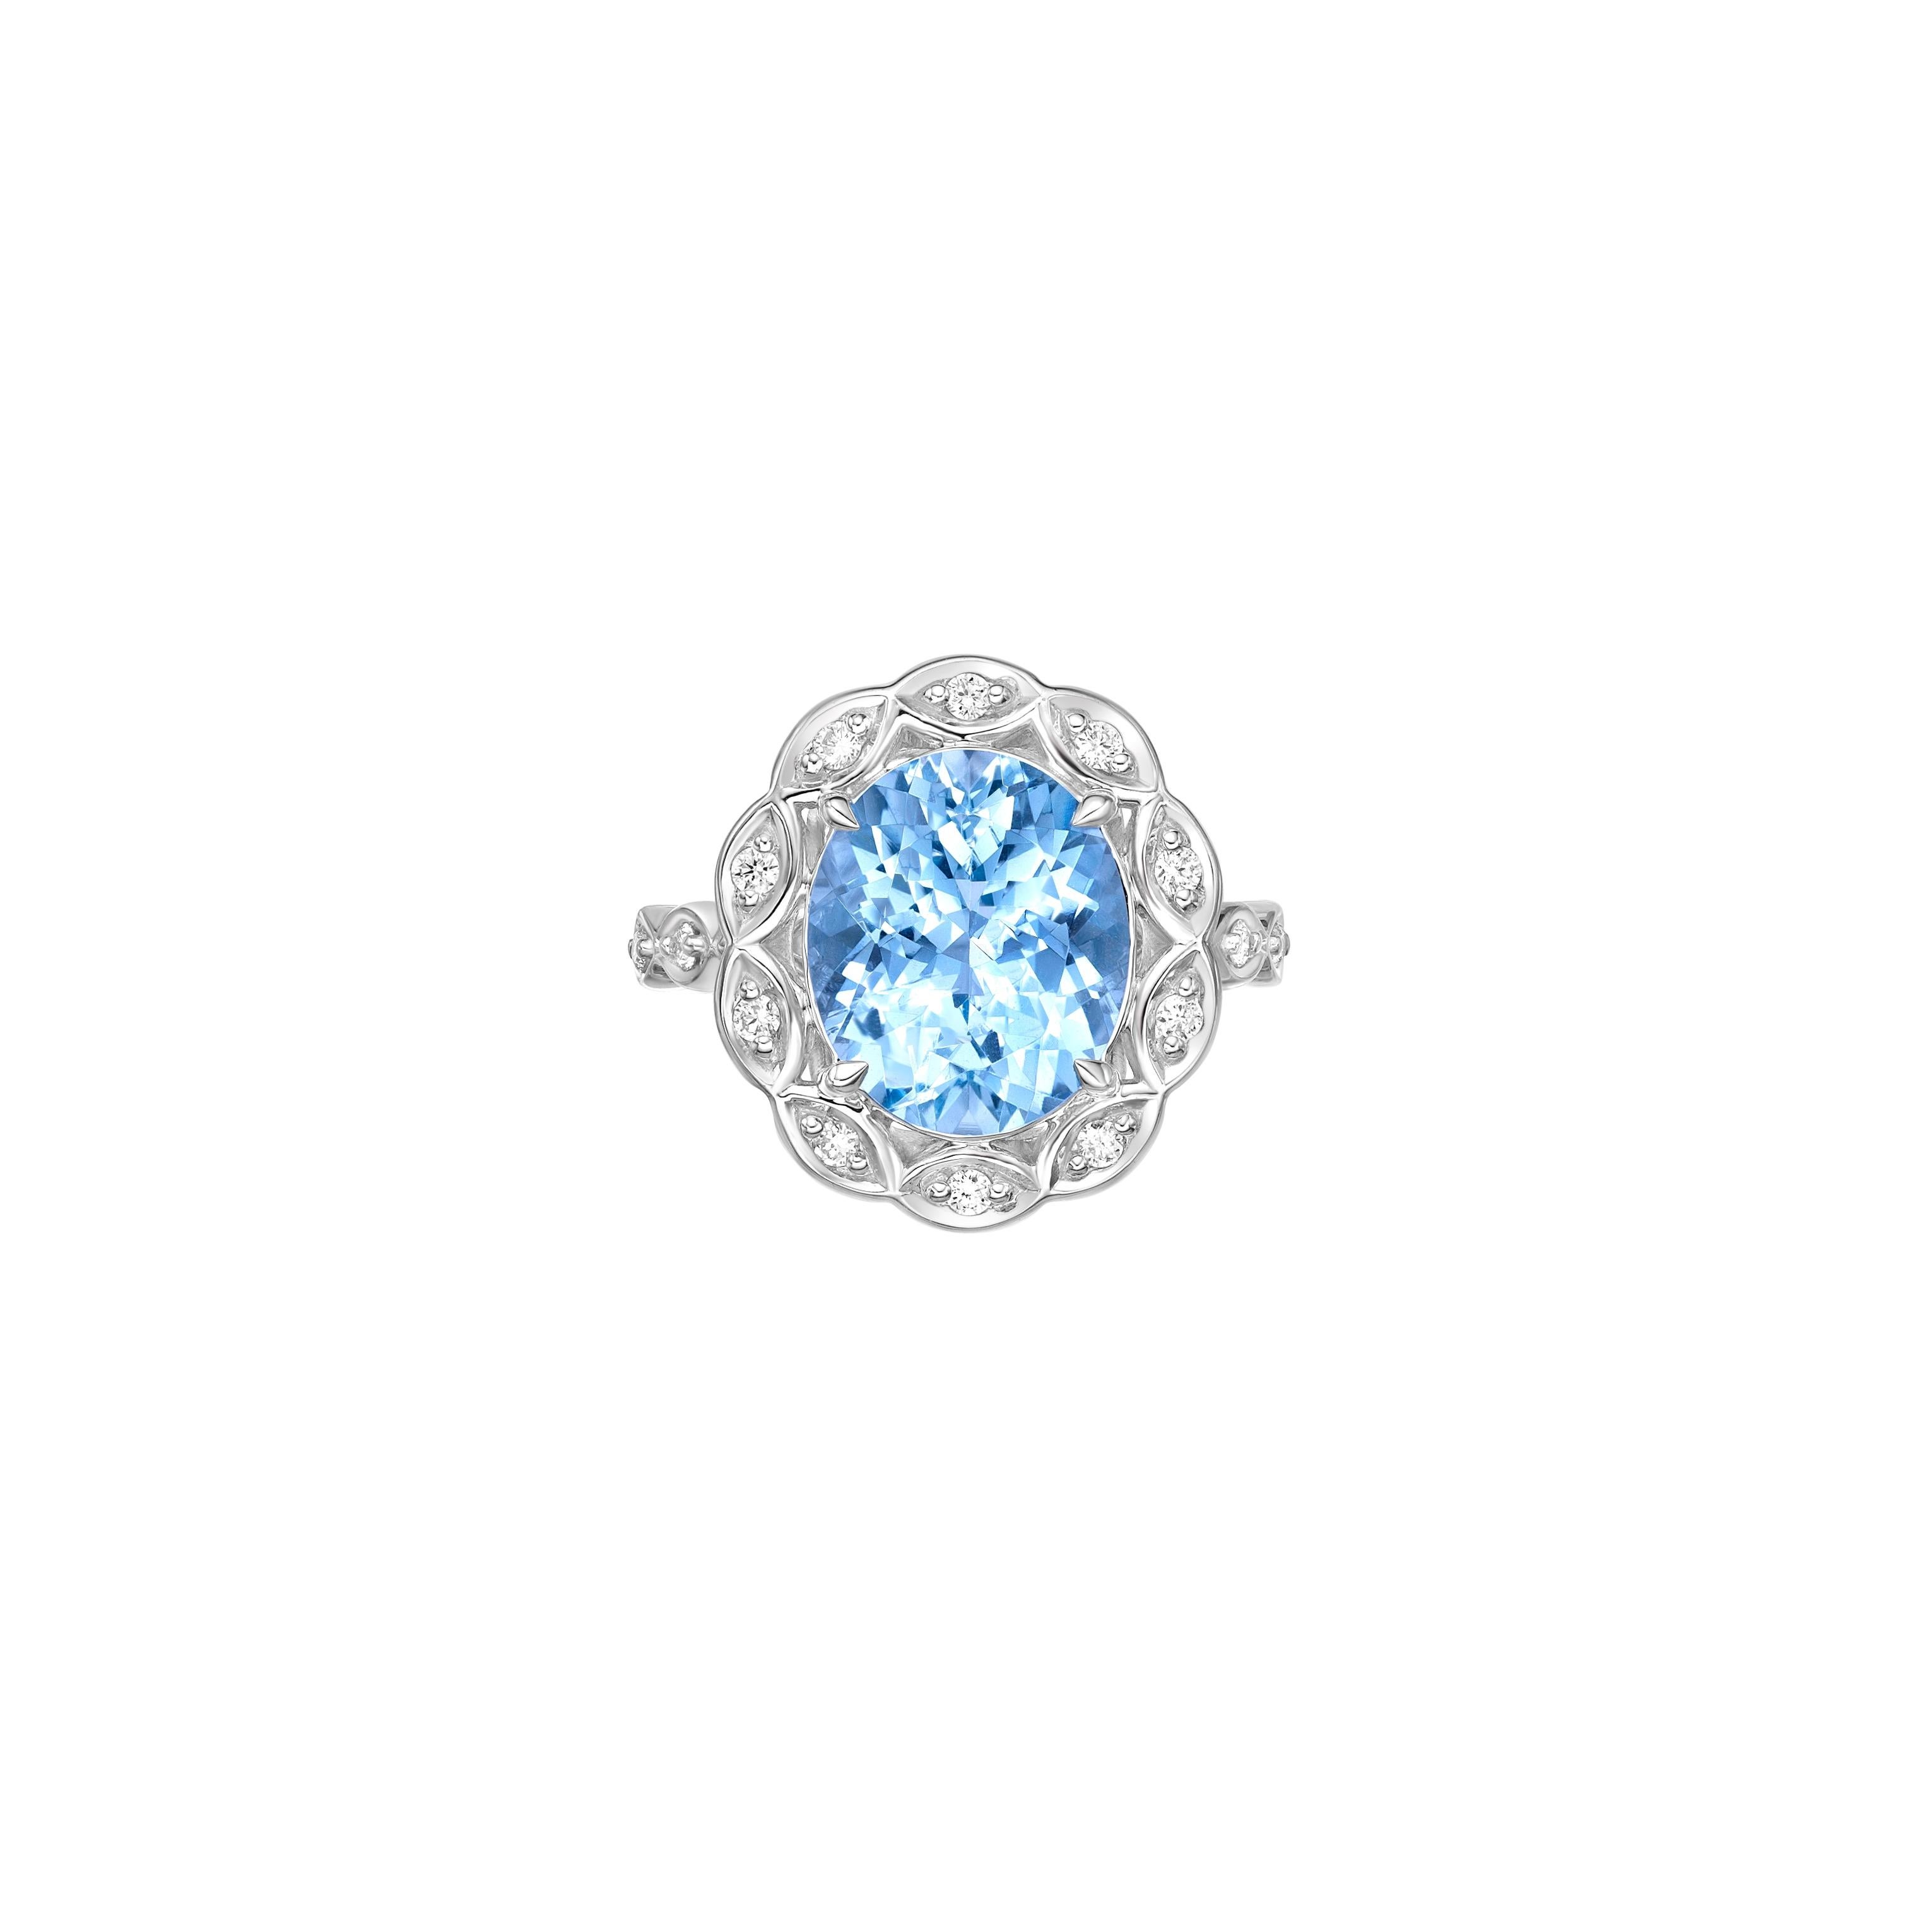 Contemporary 4.22 Carat Aquamarine Fancy Ring in 18Karat White Gold with White Diamond. For Sale